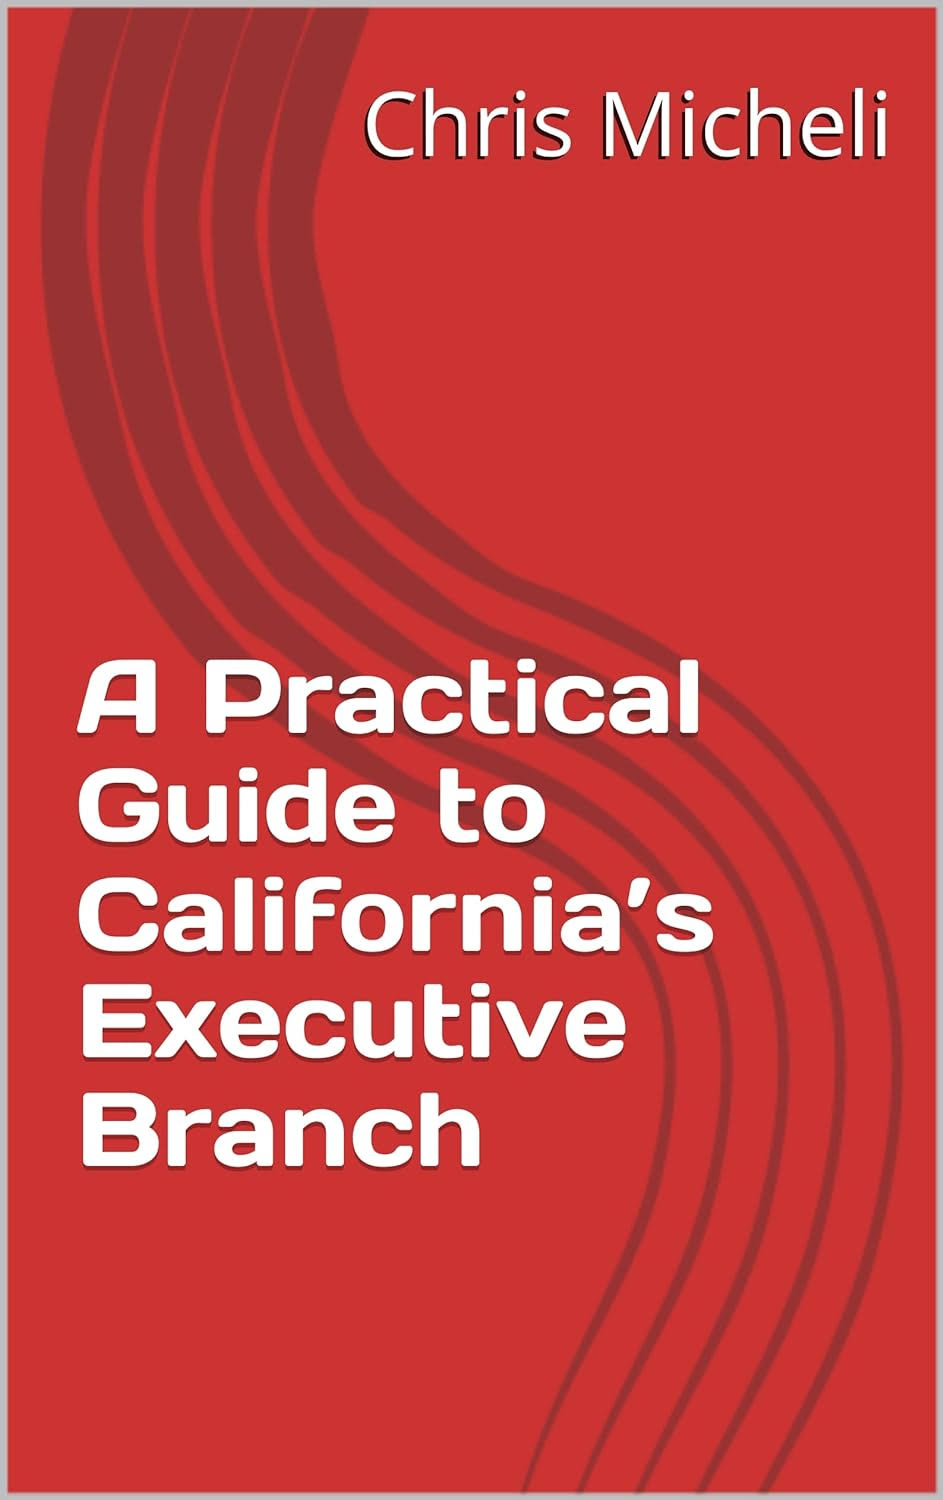 Globe Contributor Publishes Executive Branch Practical Guide